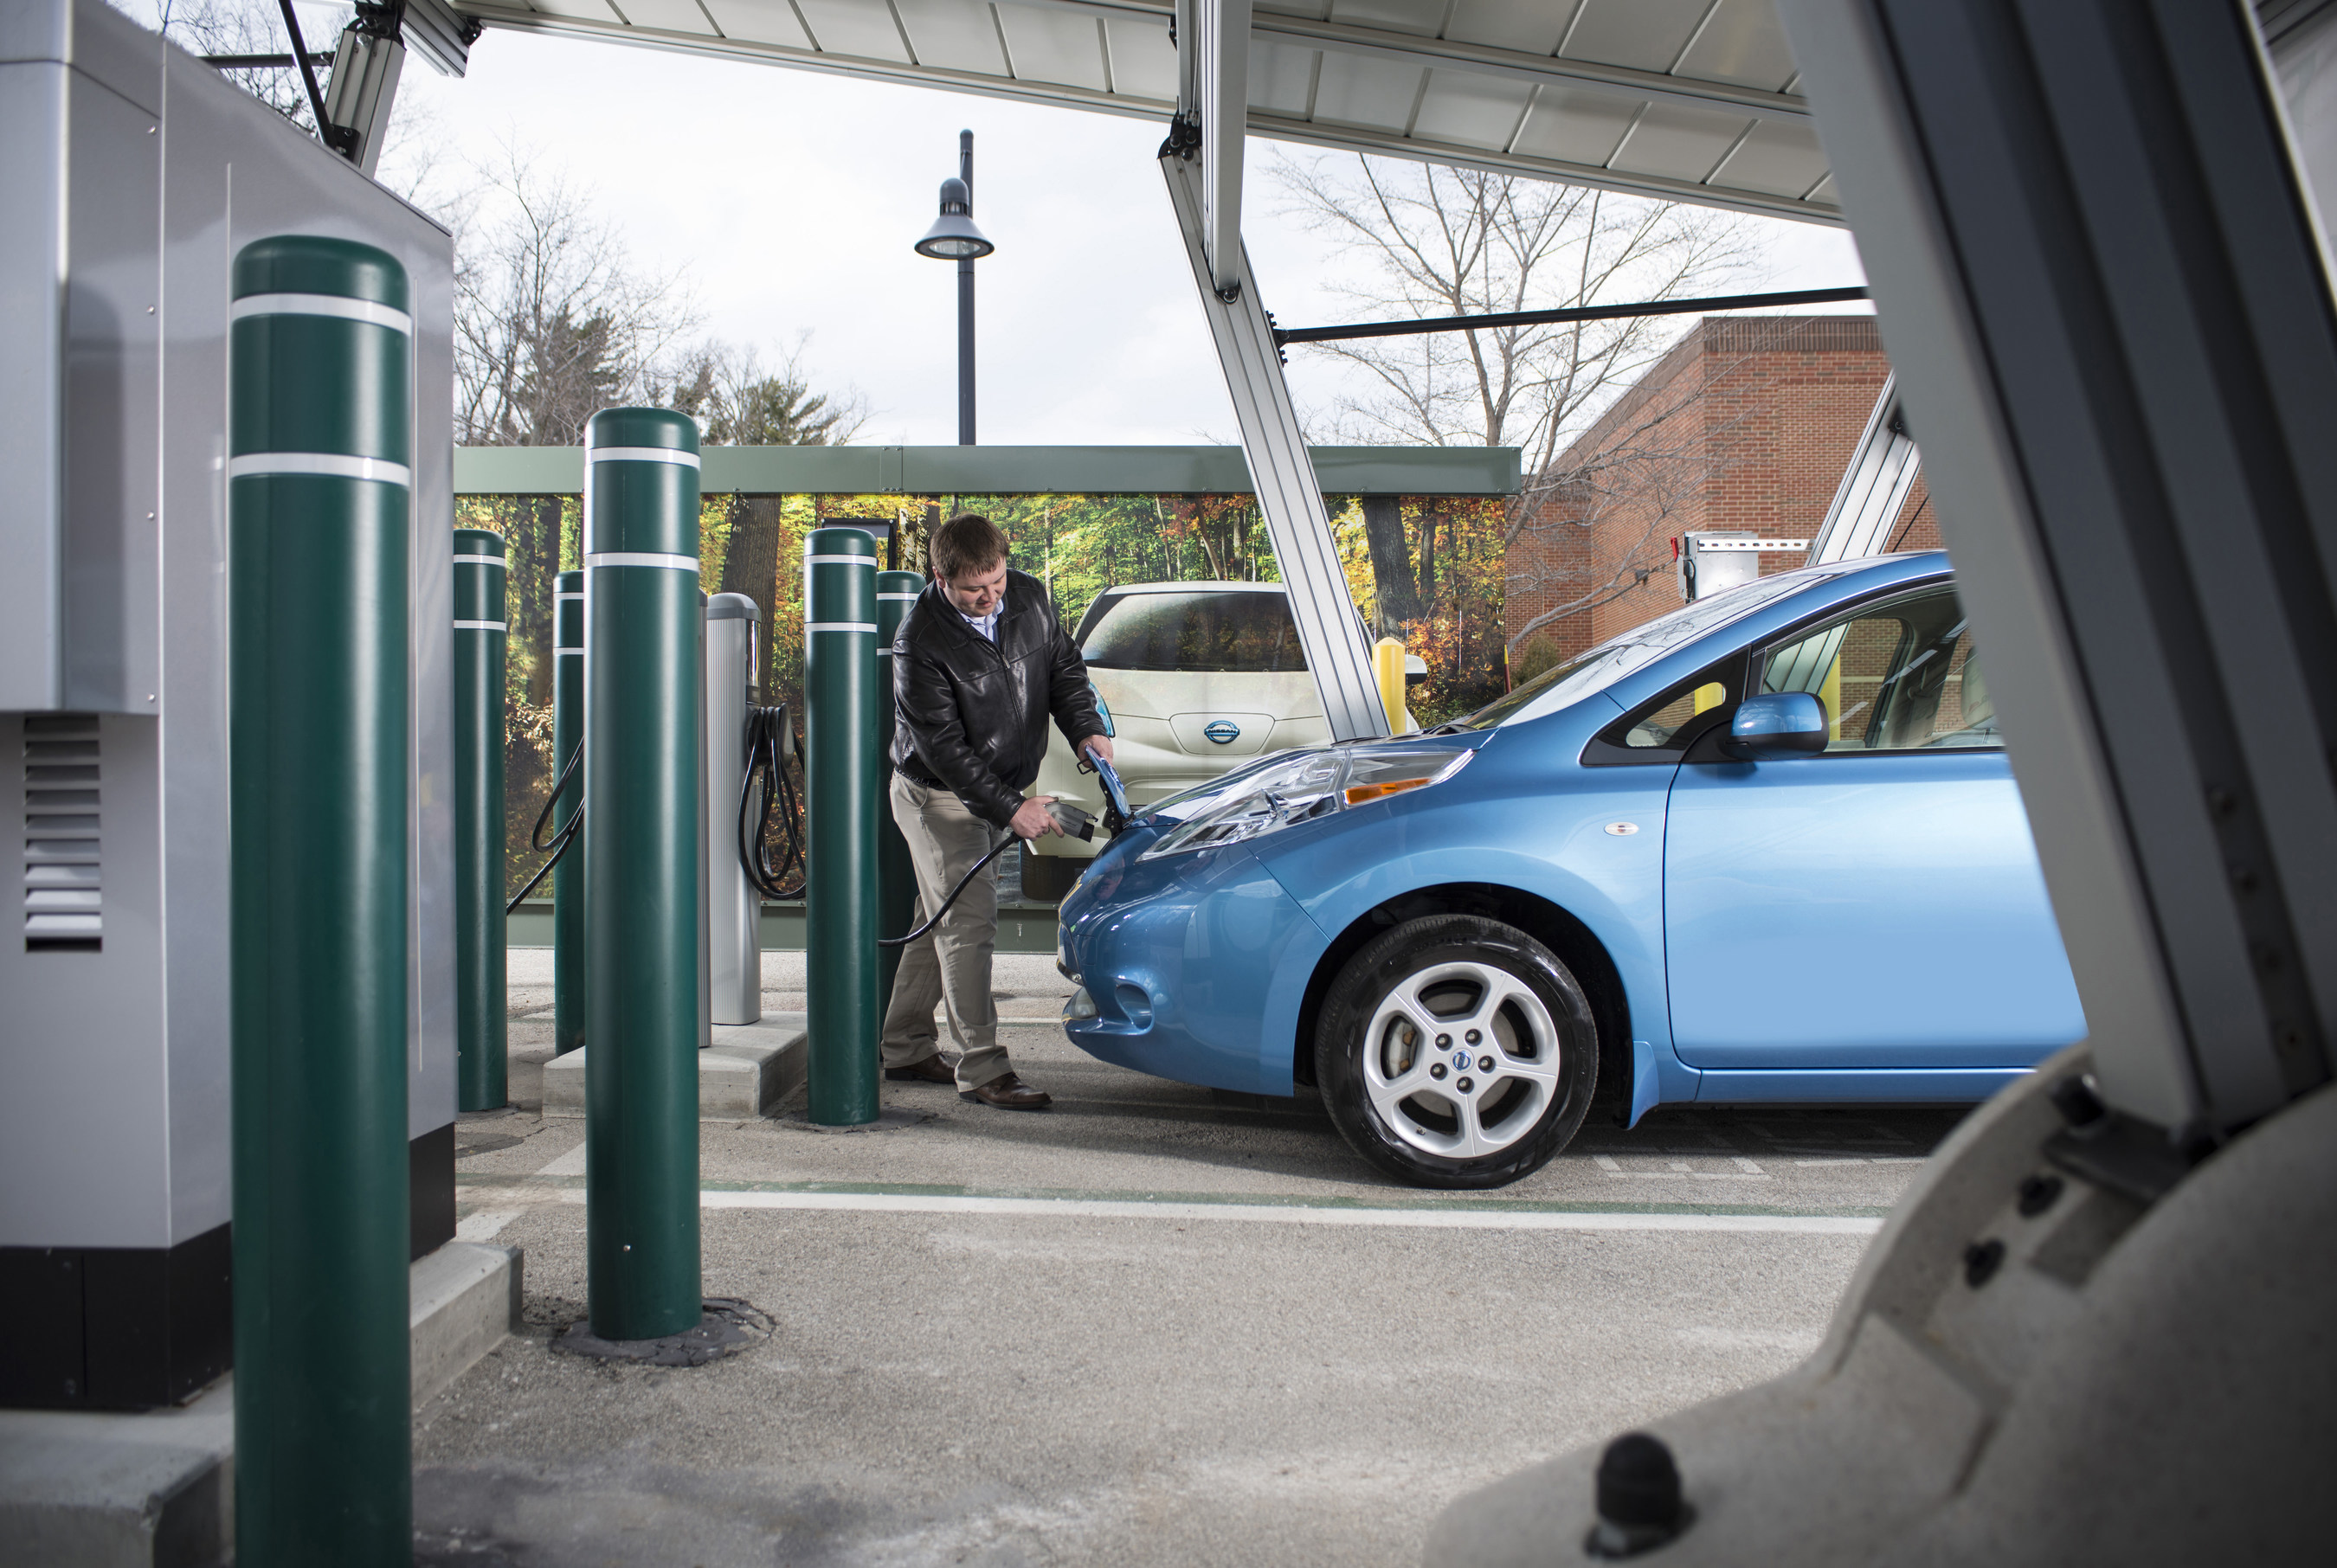 With a new $1.5 million program, Duke Energy continues to be active promoting public electric vehicle charging in North Carolina.